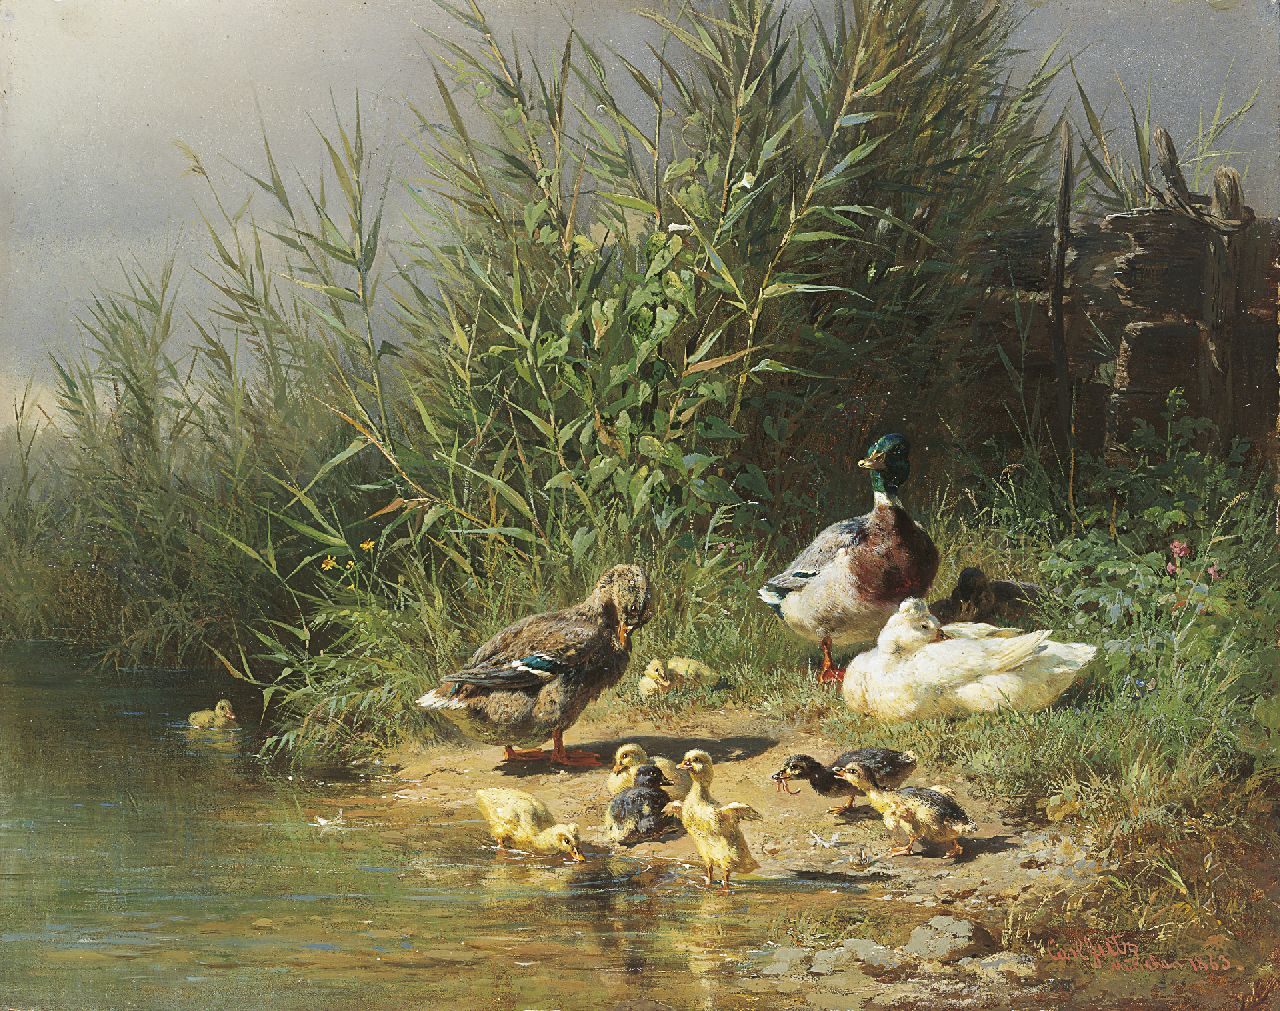 Carl Jutz | Family of ducks on a river bank, oil on painter's board, 22.8 x 29.0 cm, signed l.r. and dated 'München 1863'